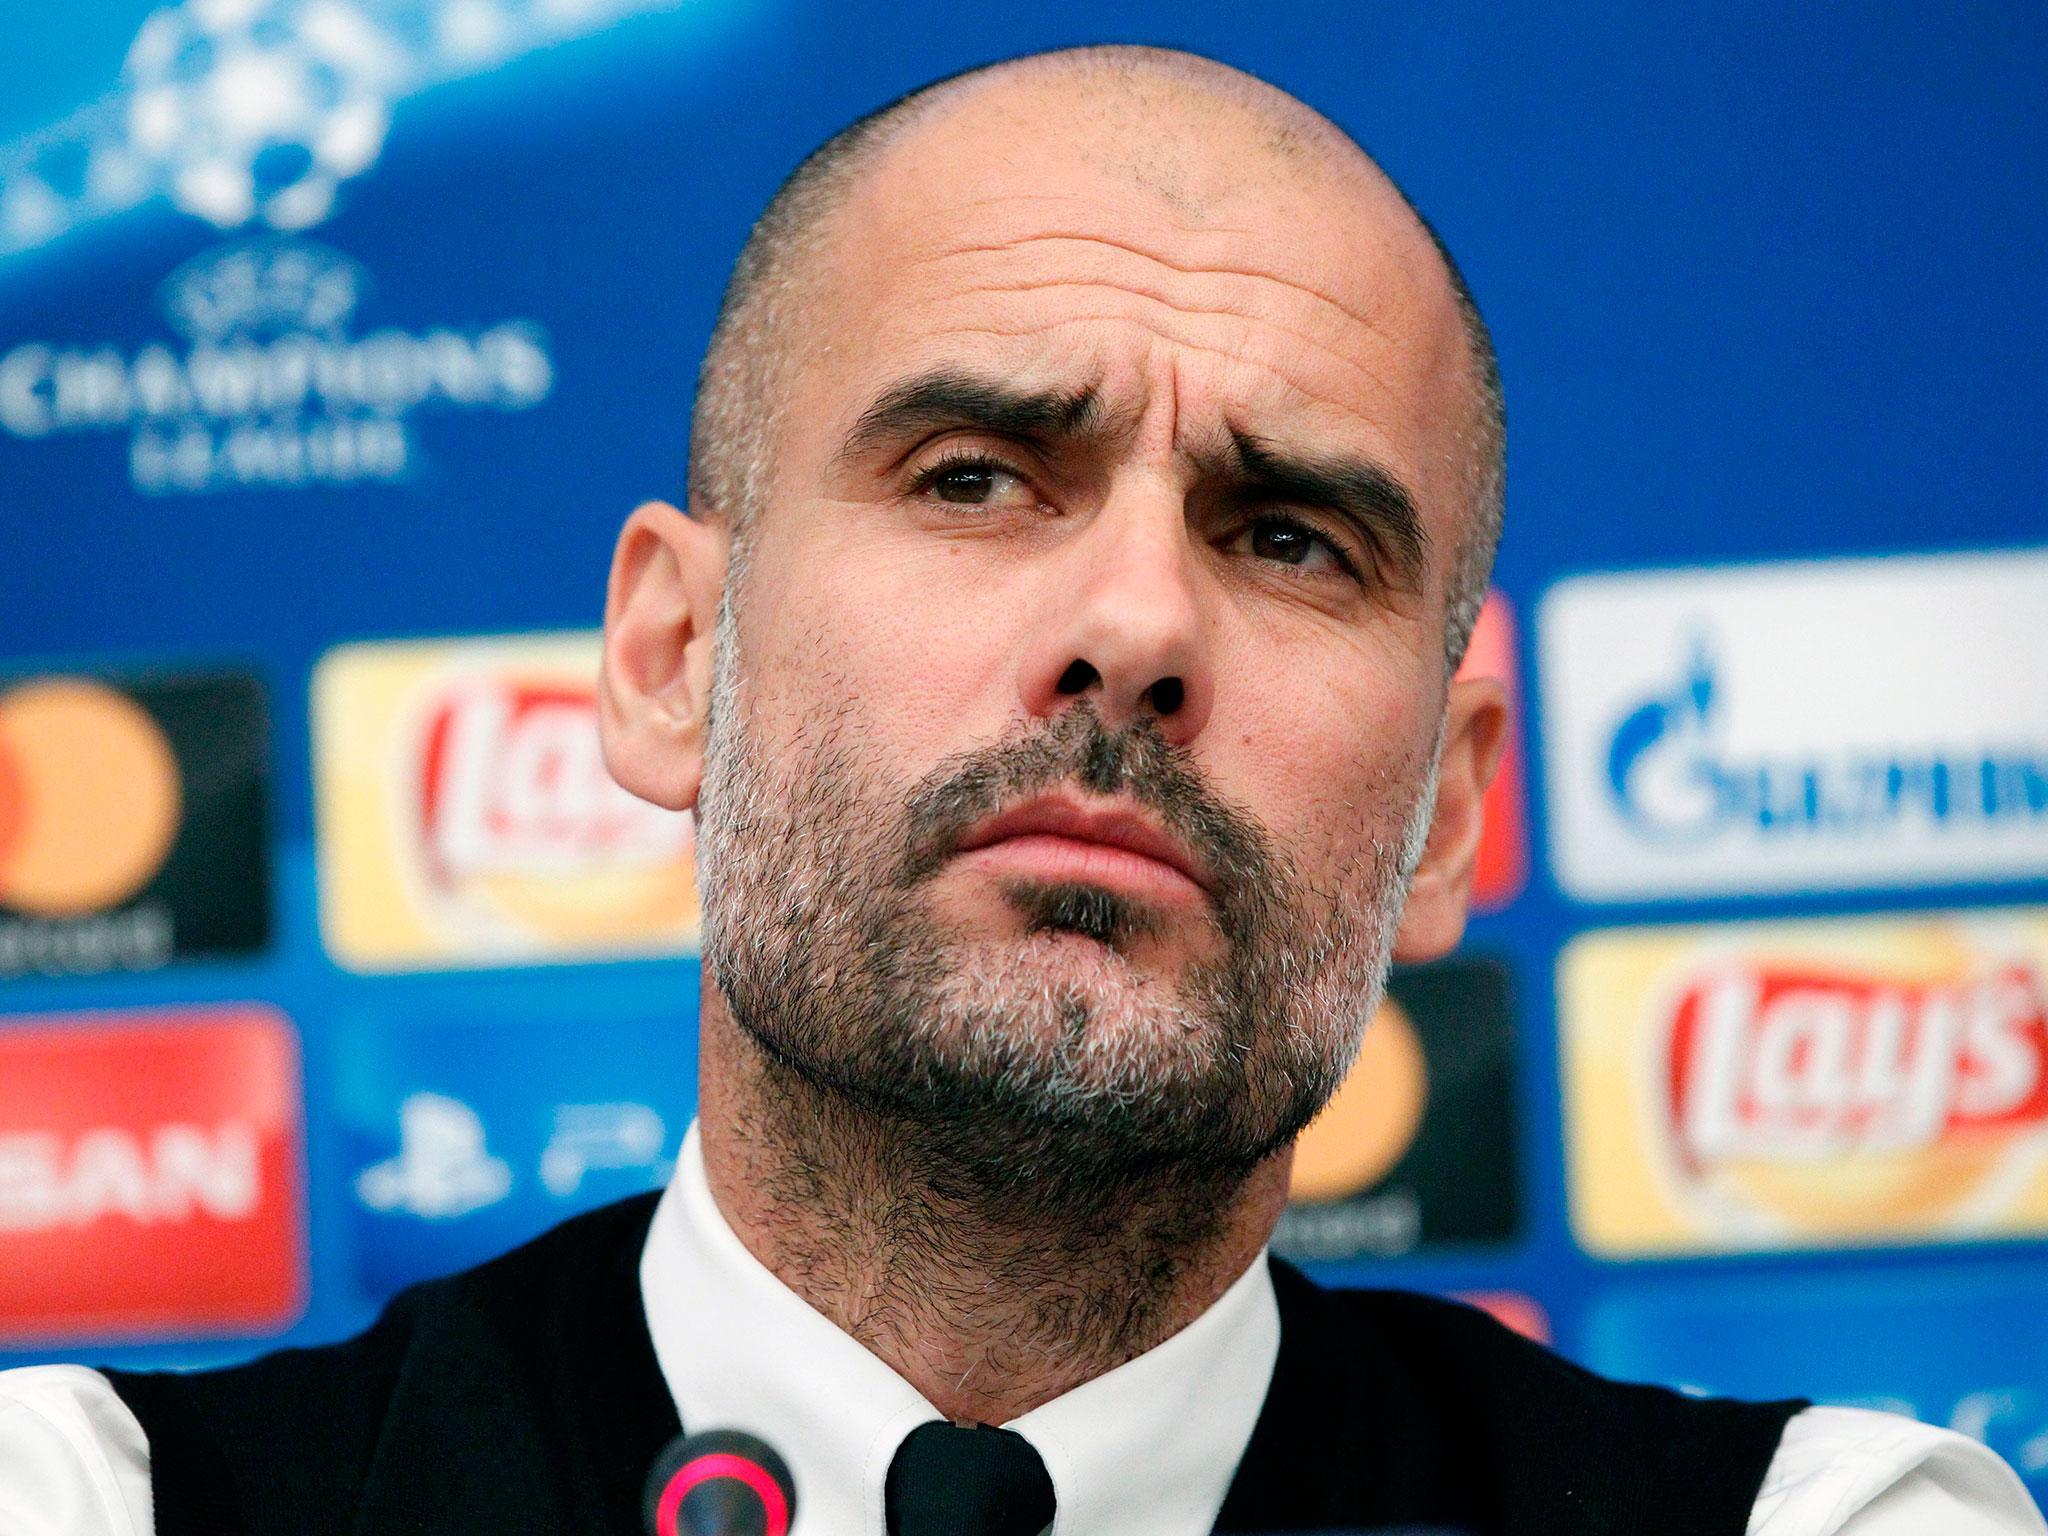 Guardiola's ideas have started to crystallise at Manchester City